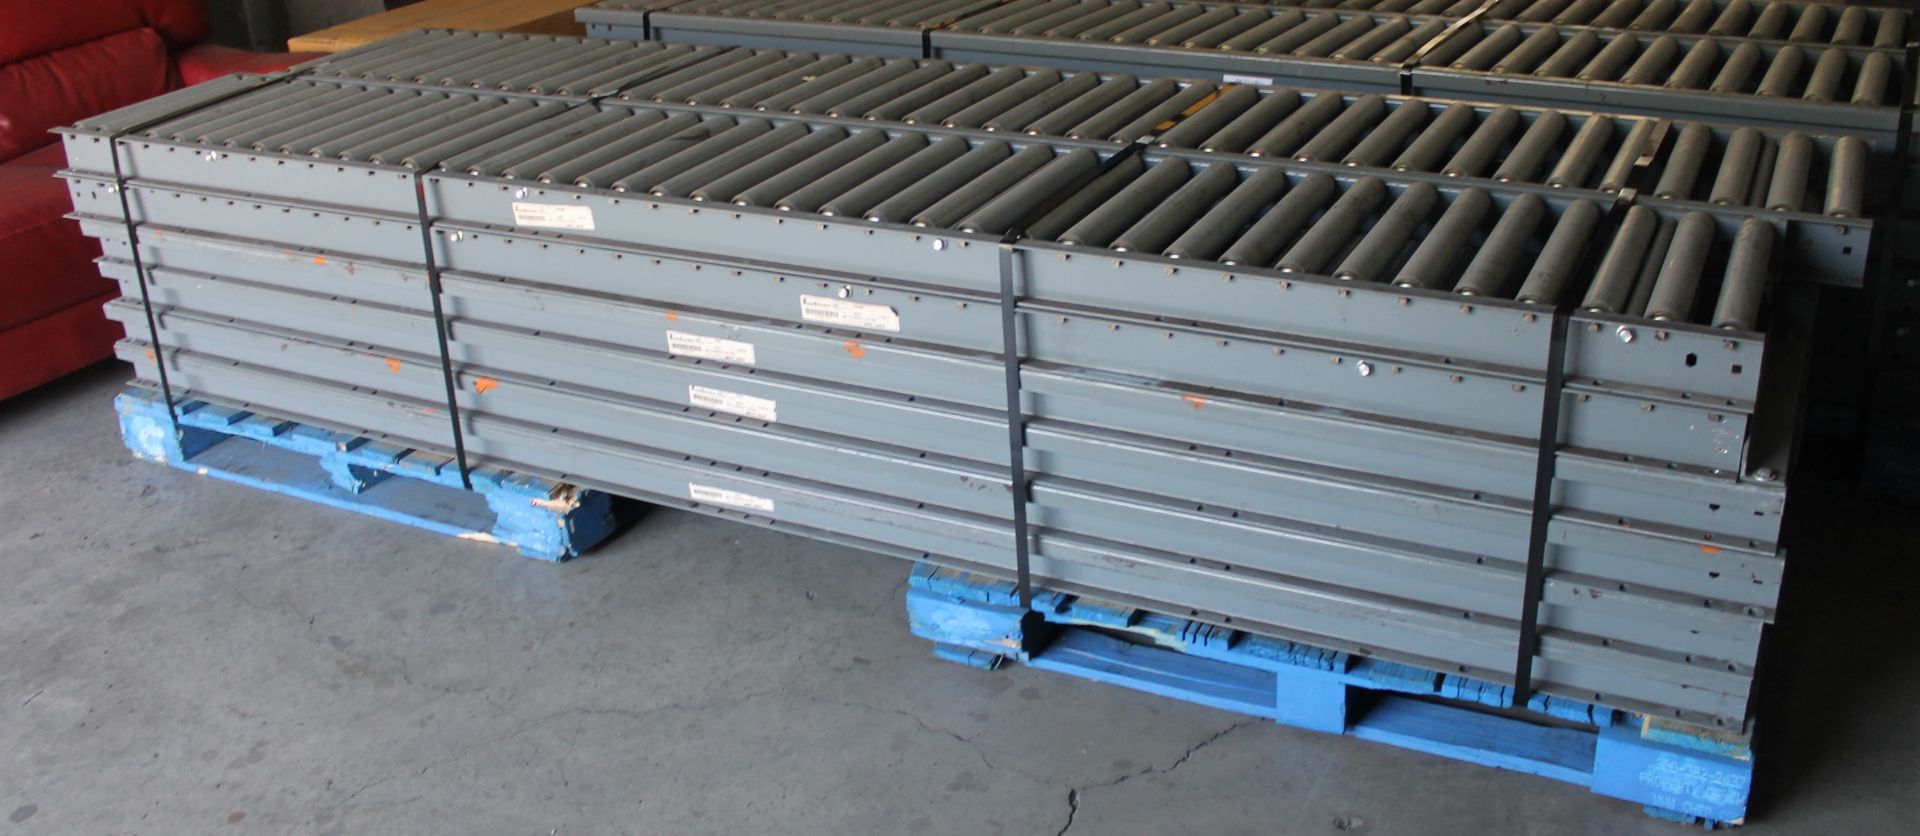 50 FT OF 18" GRAVITY ROLLER CONVEYOR, 1.9" ROLLER, 3" CENTER, PART NO: 915510MA - Image 2 of 4